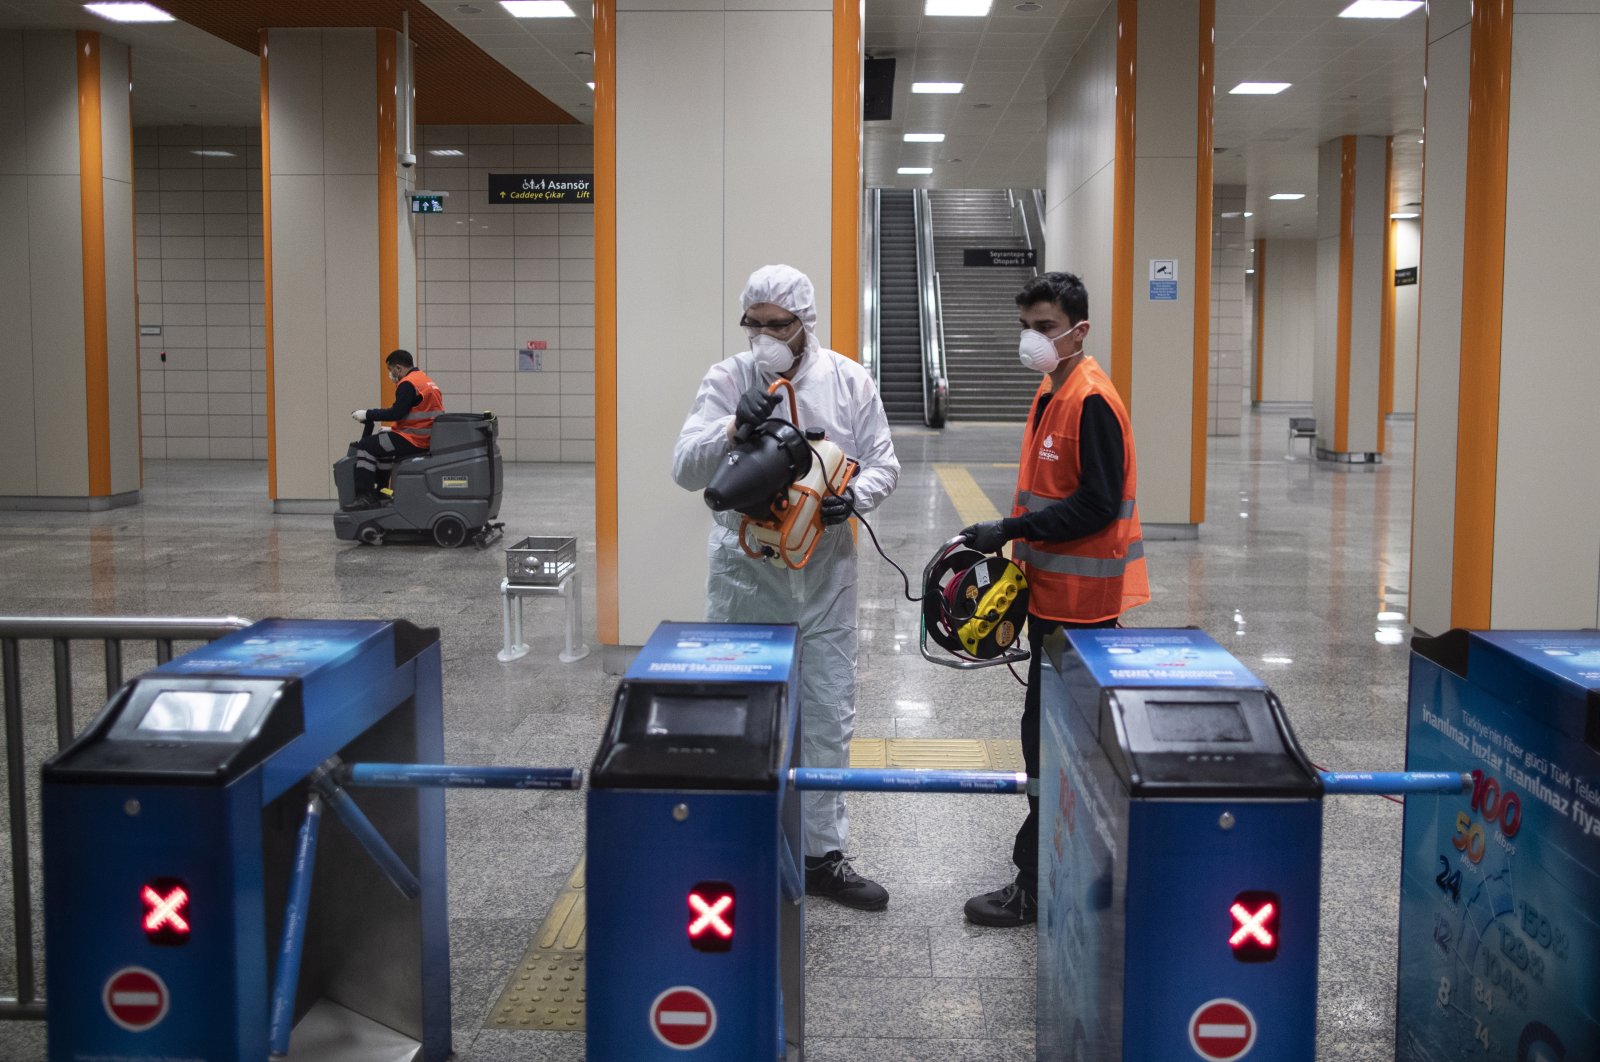 Employees of the Istanbul Metropolitan Municipality disinfects a metro station to prevent the spread of the novel coronavirus, COVID-19, in Istanbul, Wednesday, March 11, 2020. (EPA Photo)